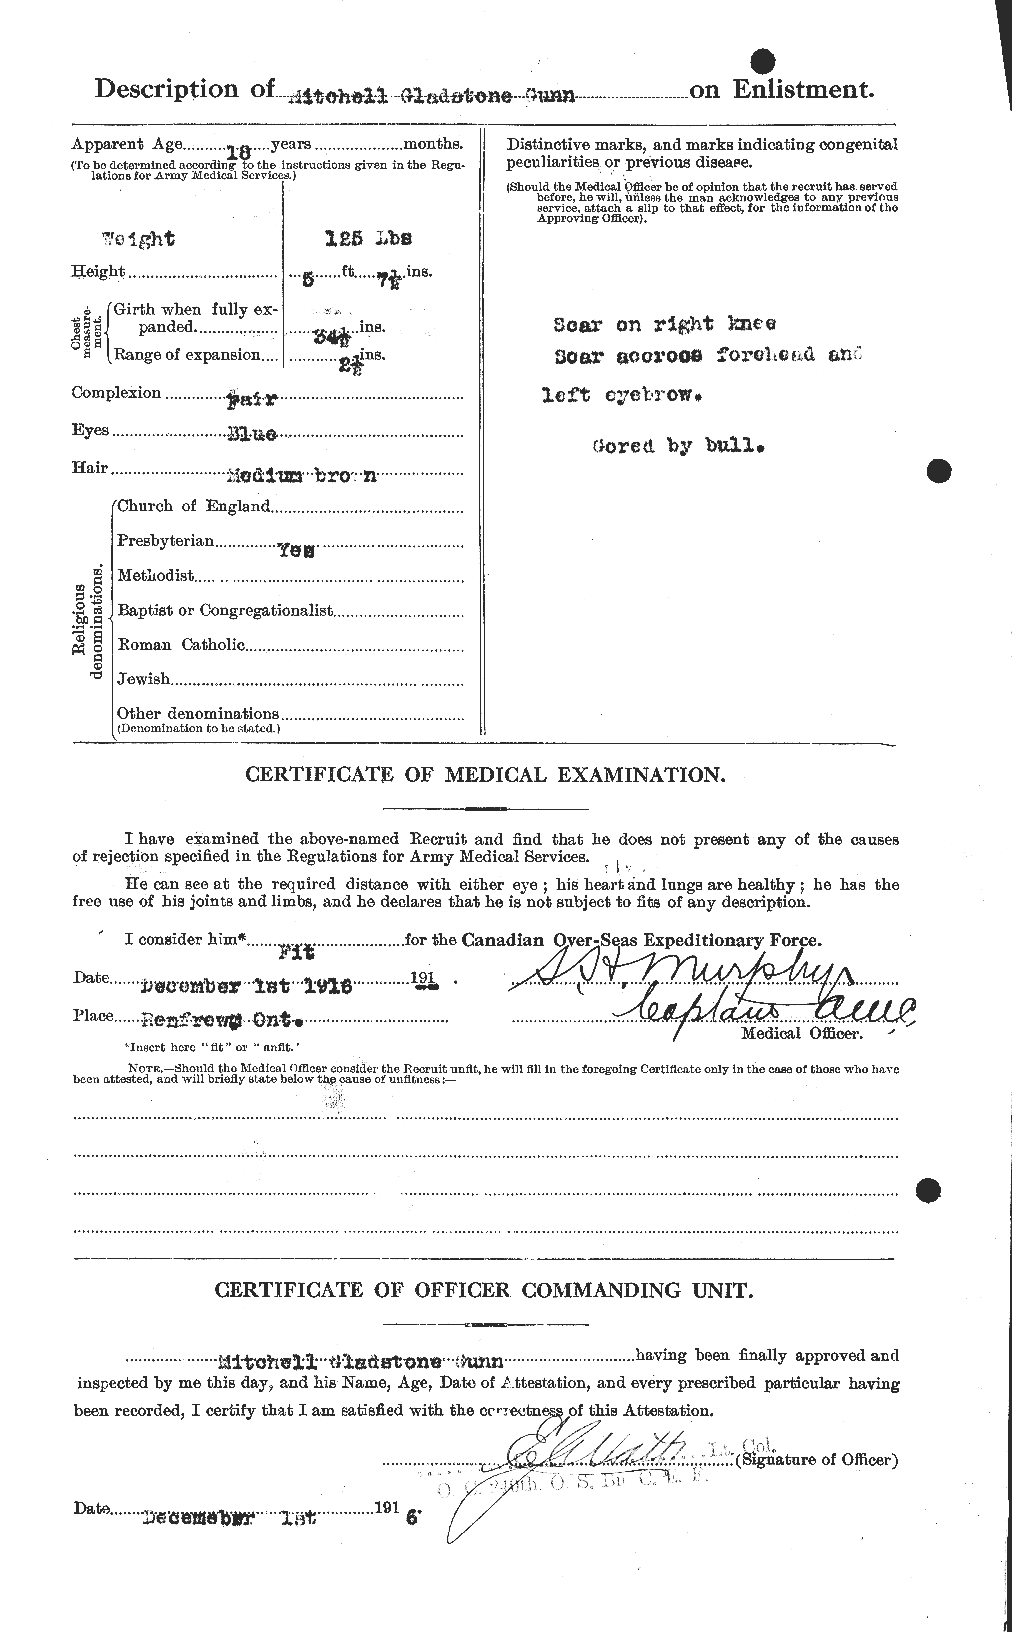 Personnel Records of the First World War - CEF 369246b